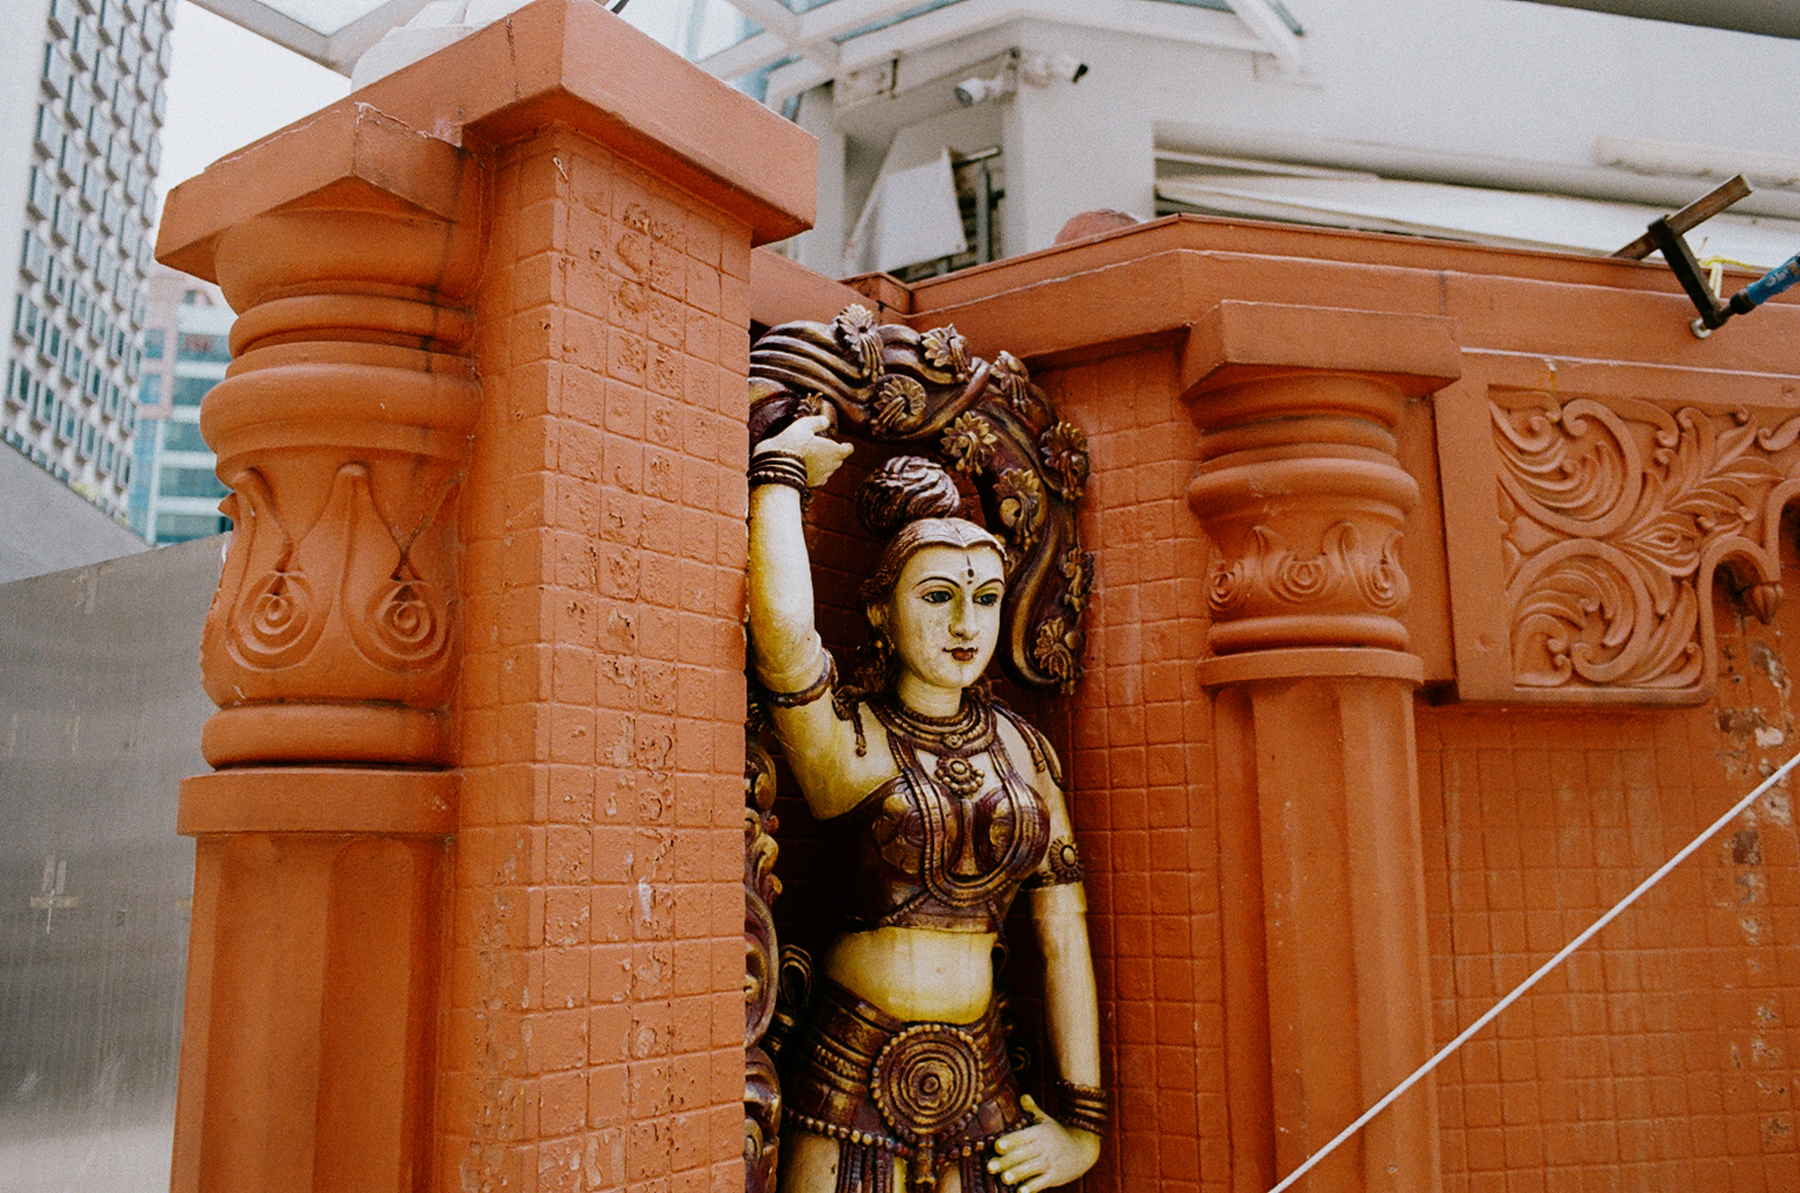 a scan of a color photo showing a carving of a Hindu deity on the side of the Sri Krishnan temple